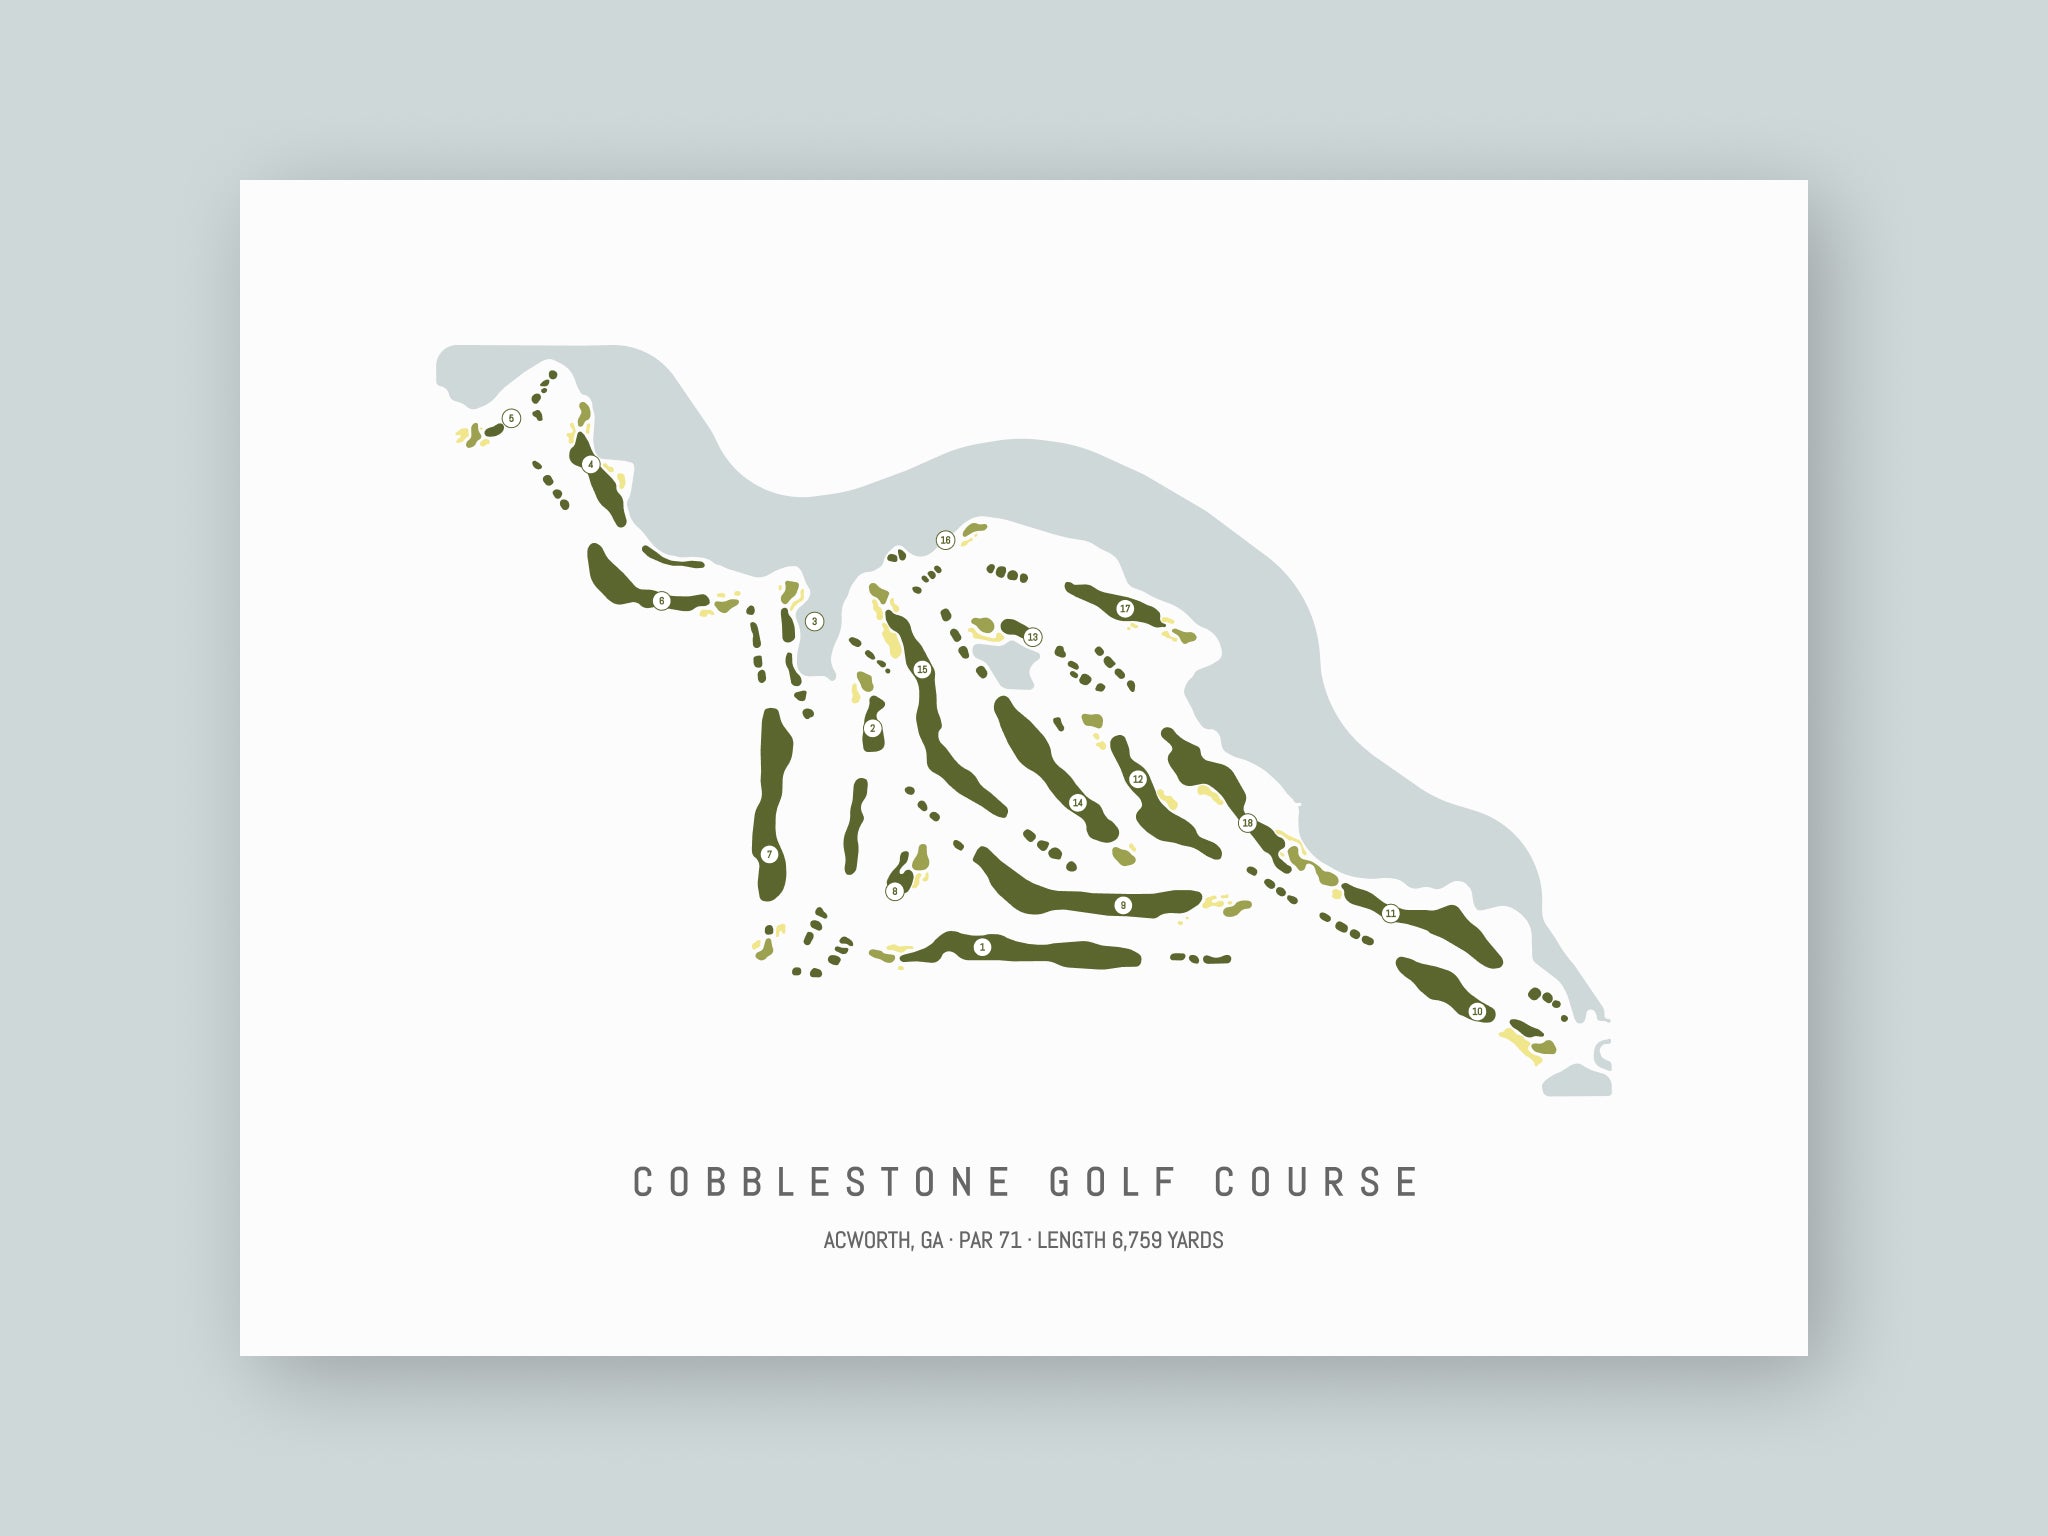 Cobblestone-Golf-Course-GA--Unframed-24x18-With-Hole-Numbers